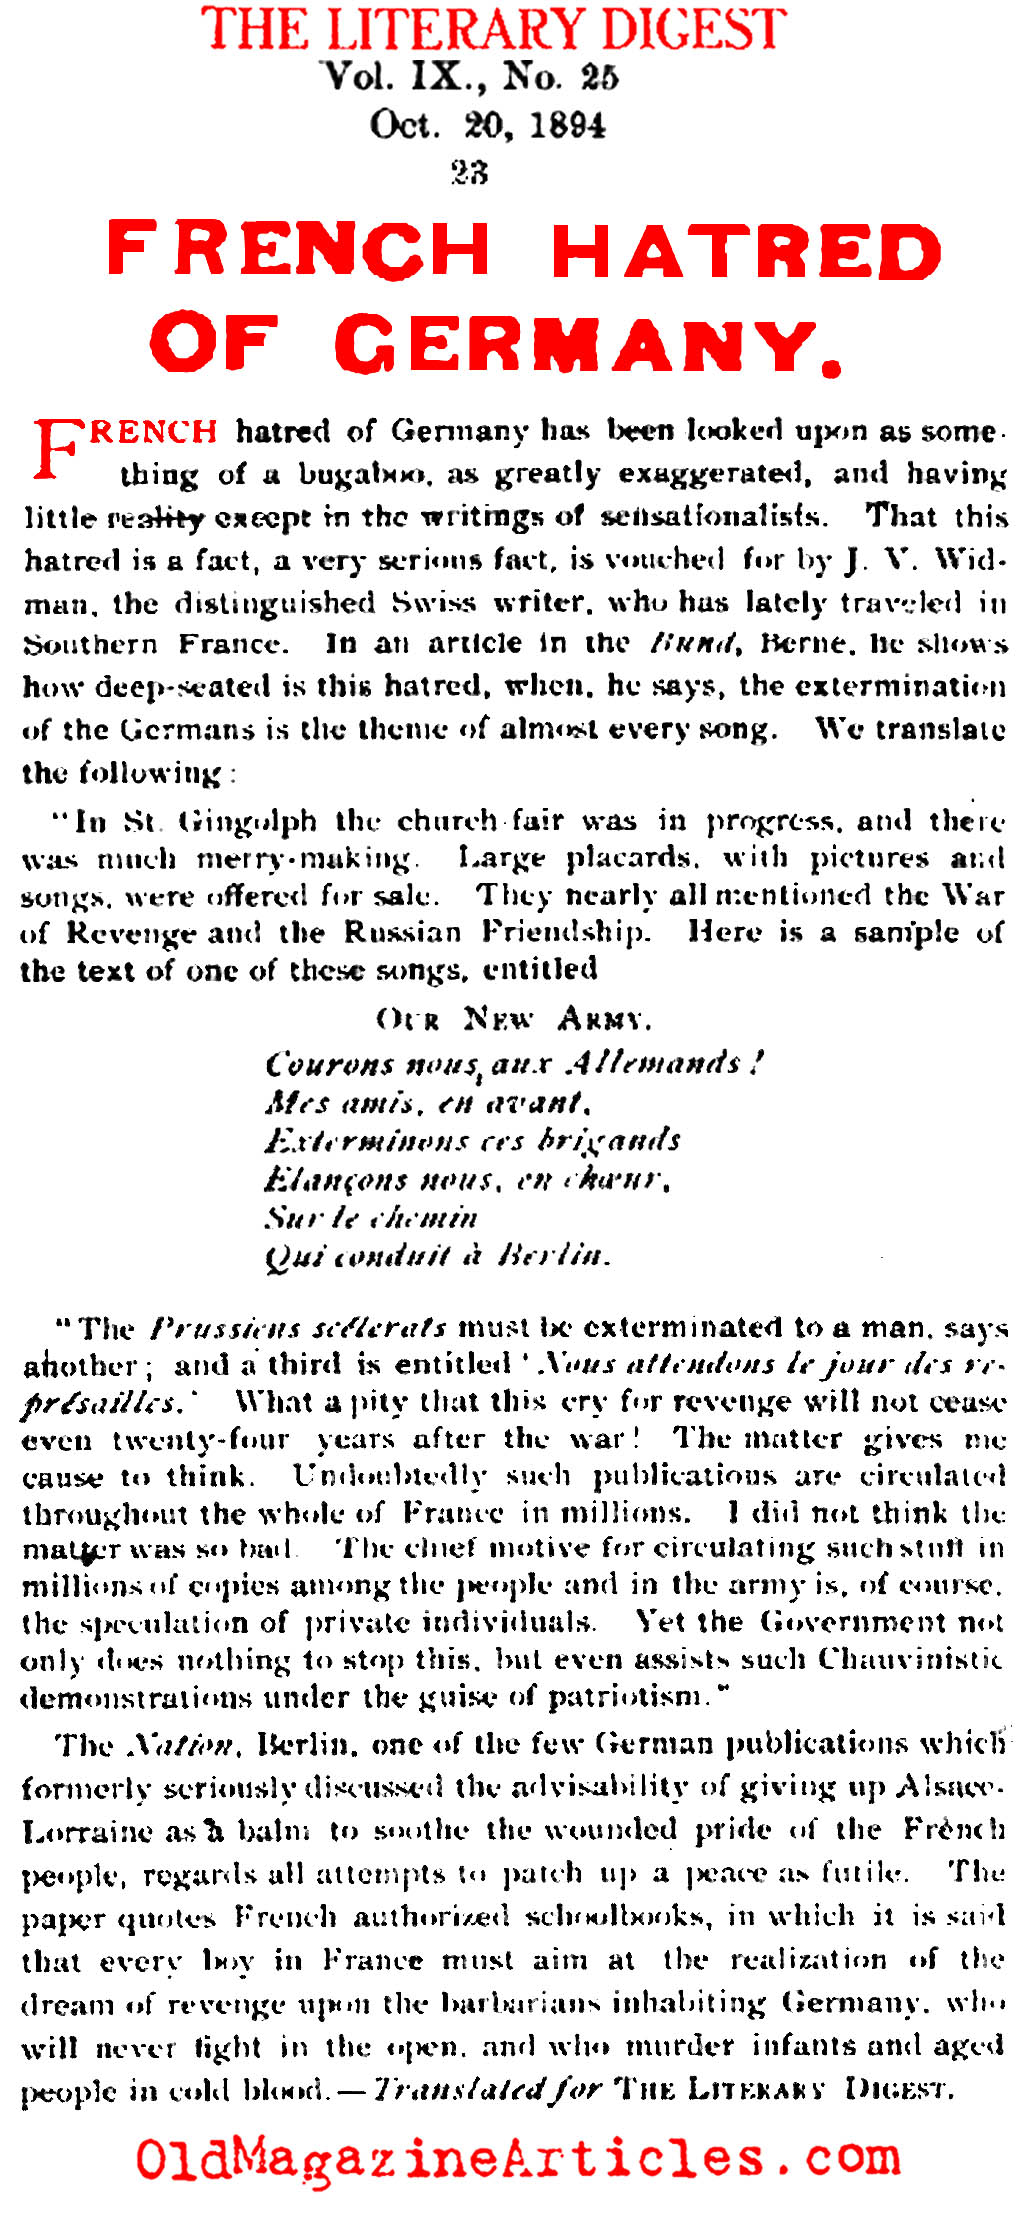 The French Hatred of Germany (Literary Digest, 1894)